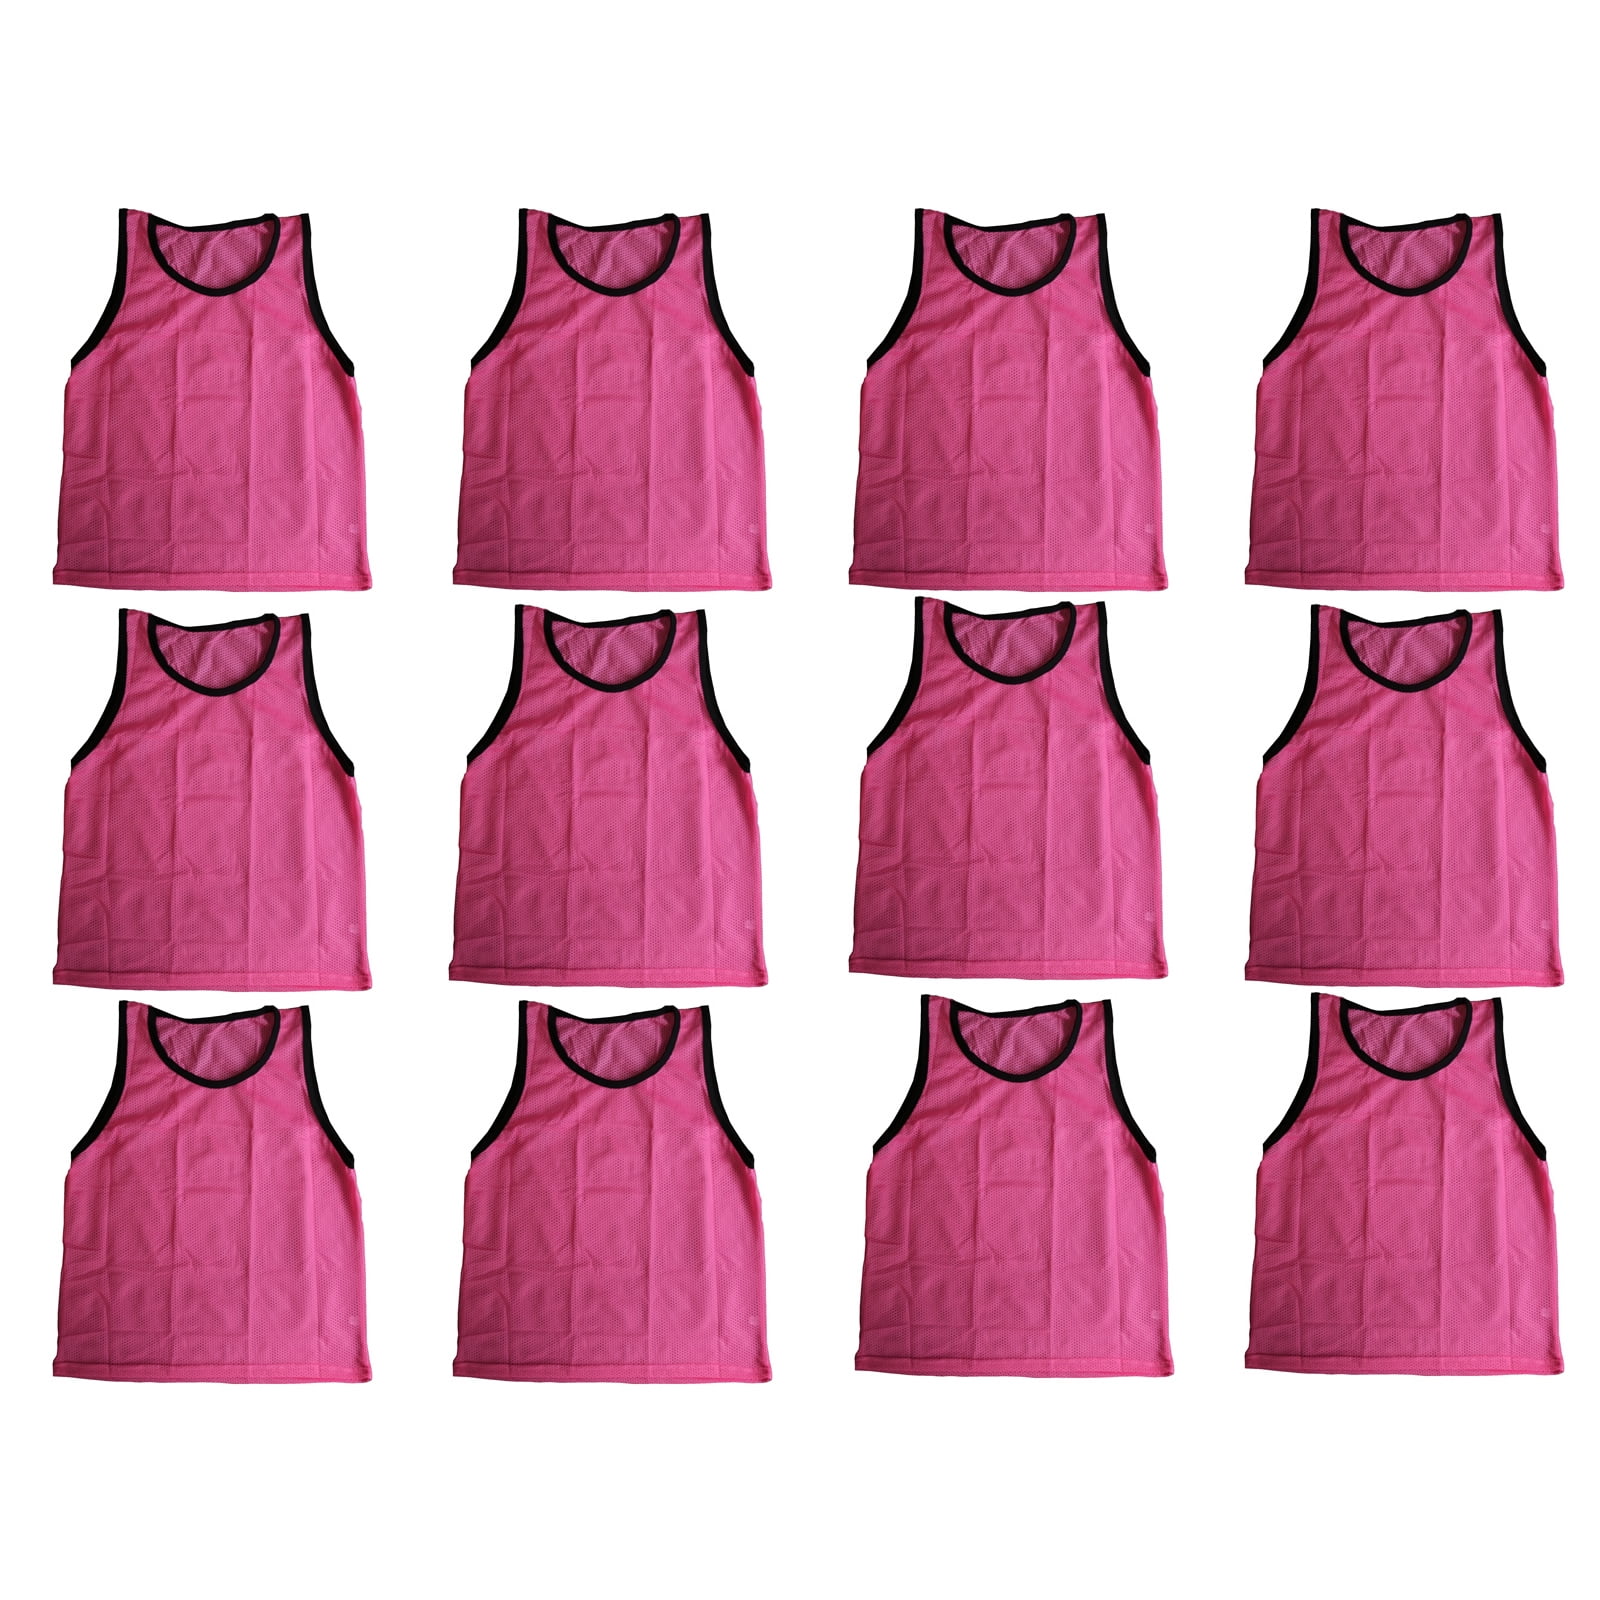 12 GIRLS PINK Scrimmage VESTS Training Pinnies Soccer Softball size YOUTH NEW! 